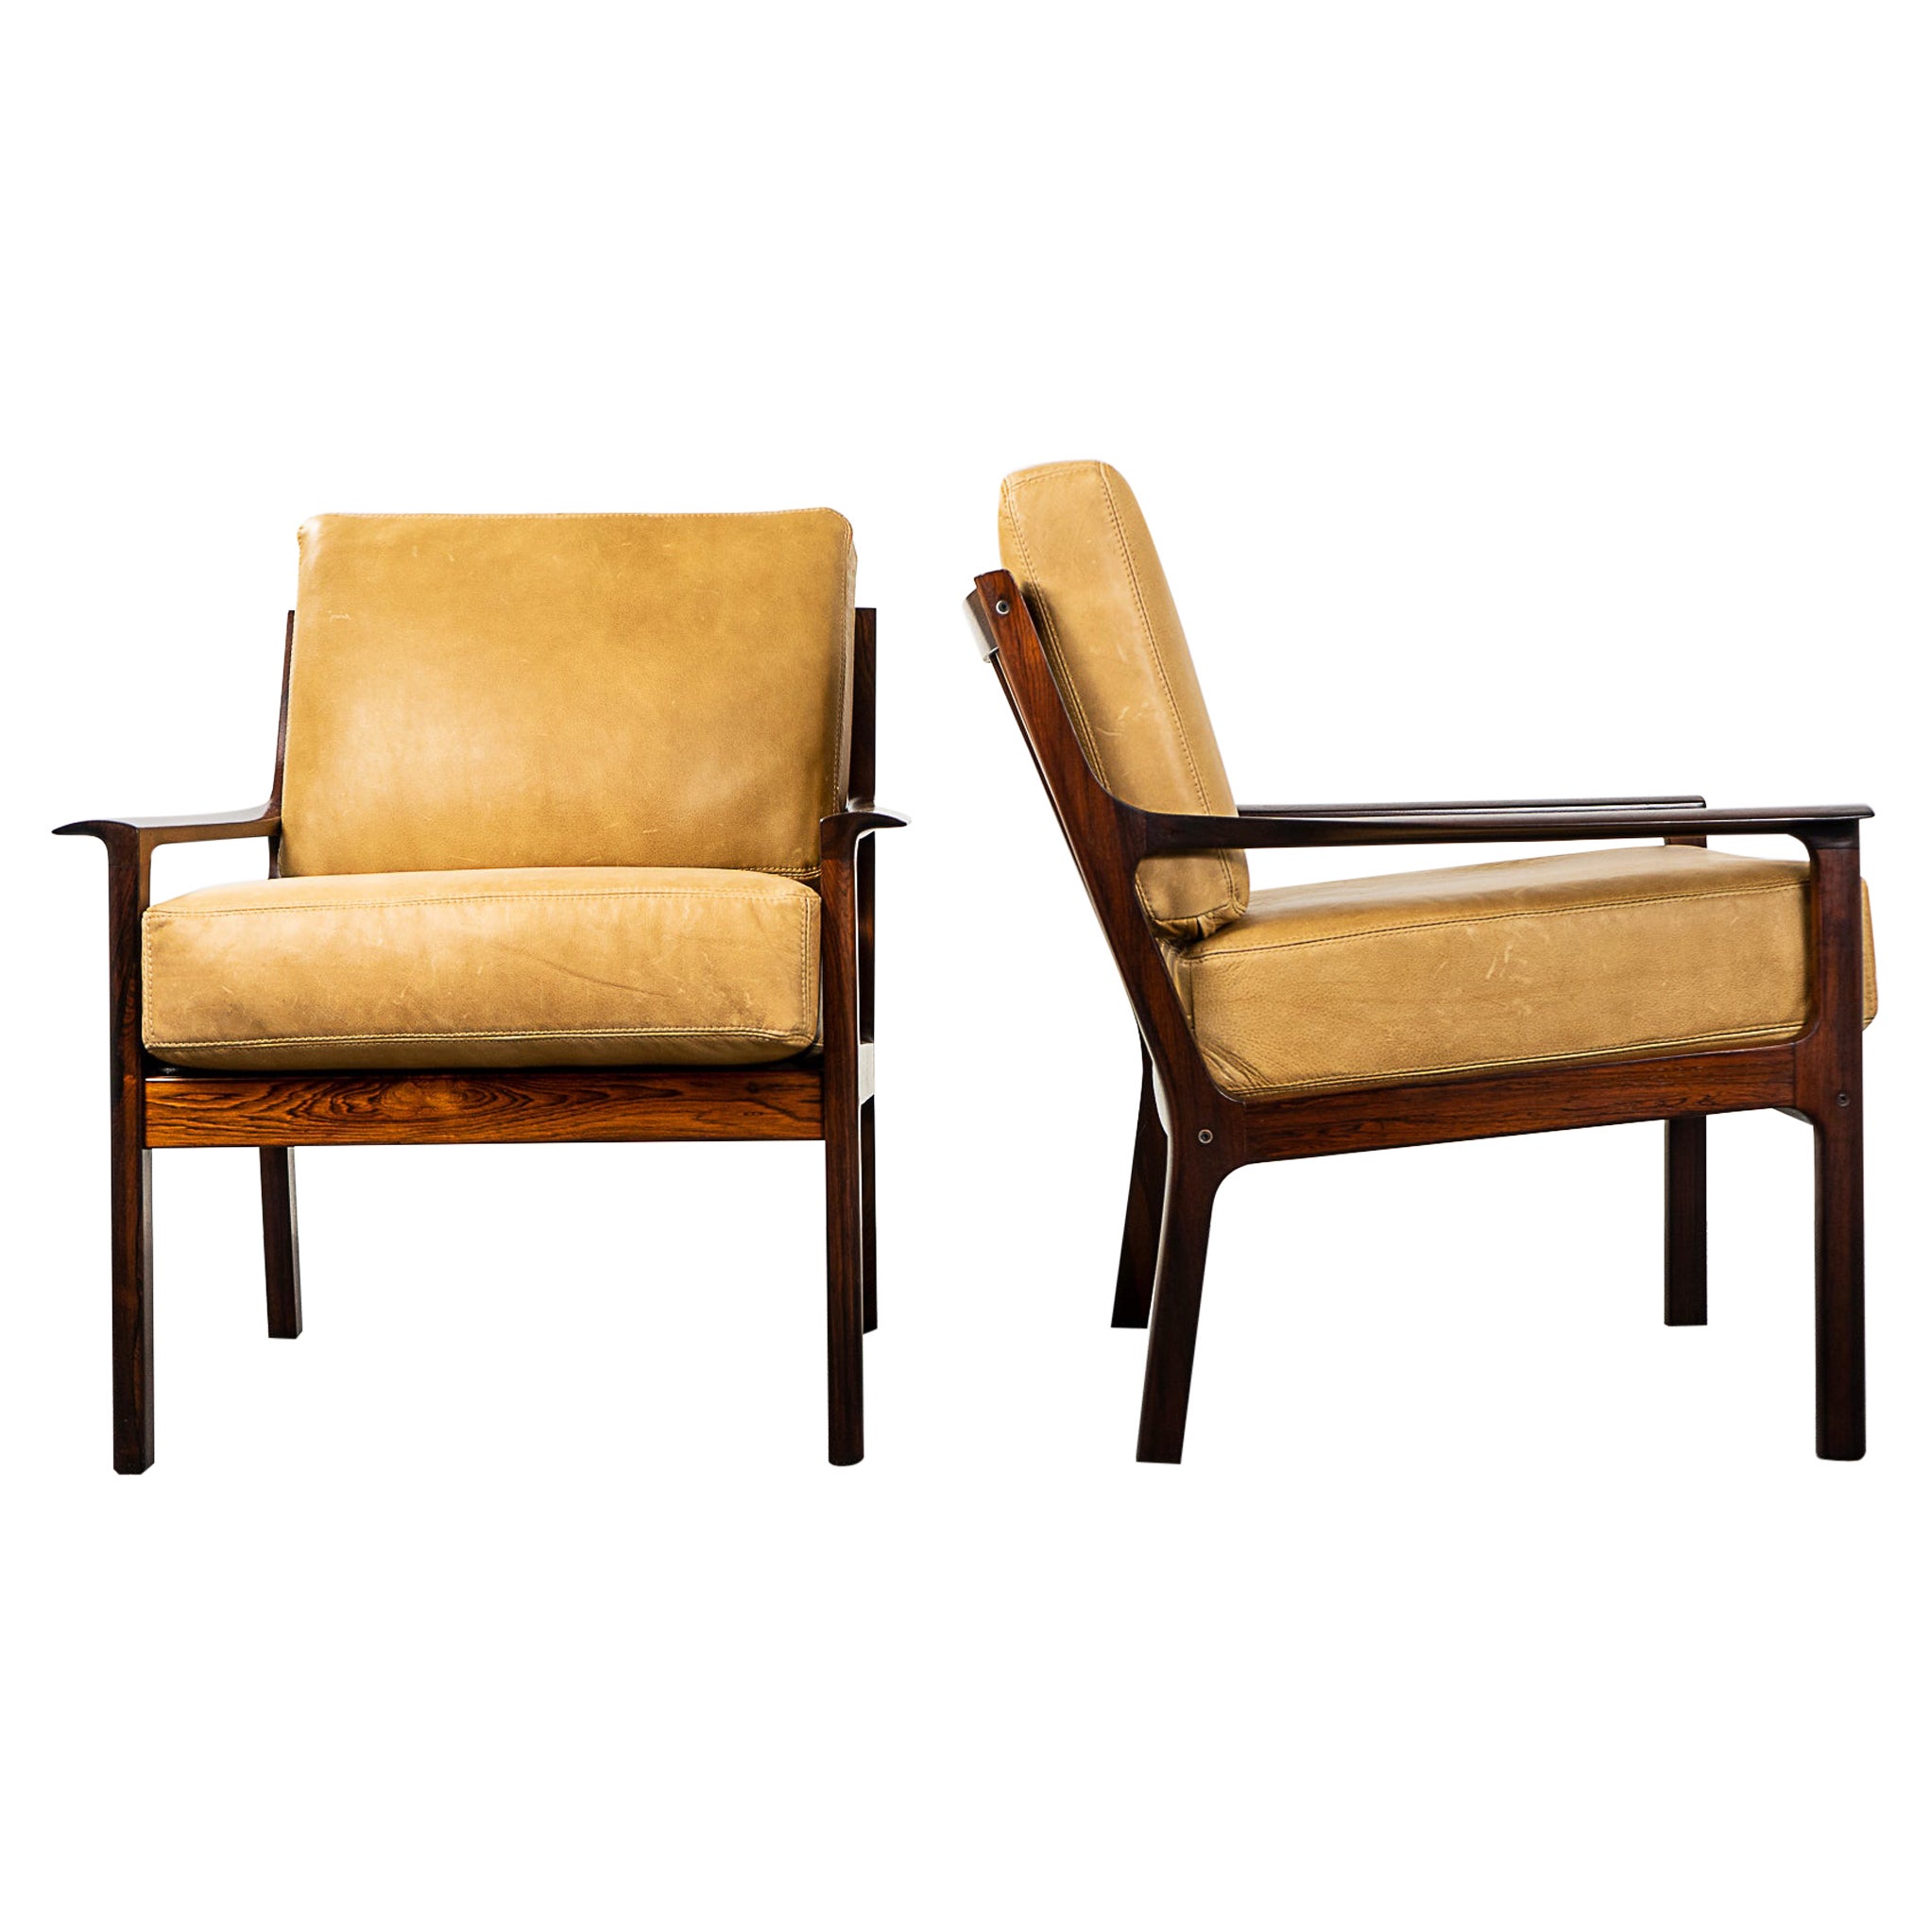 Rosewood & Leather Norwegian Lounge Chairs by Frederik Kayser